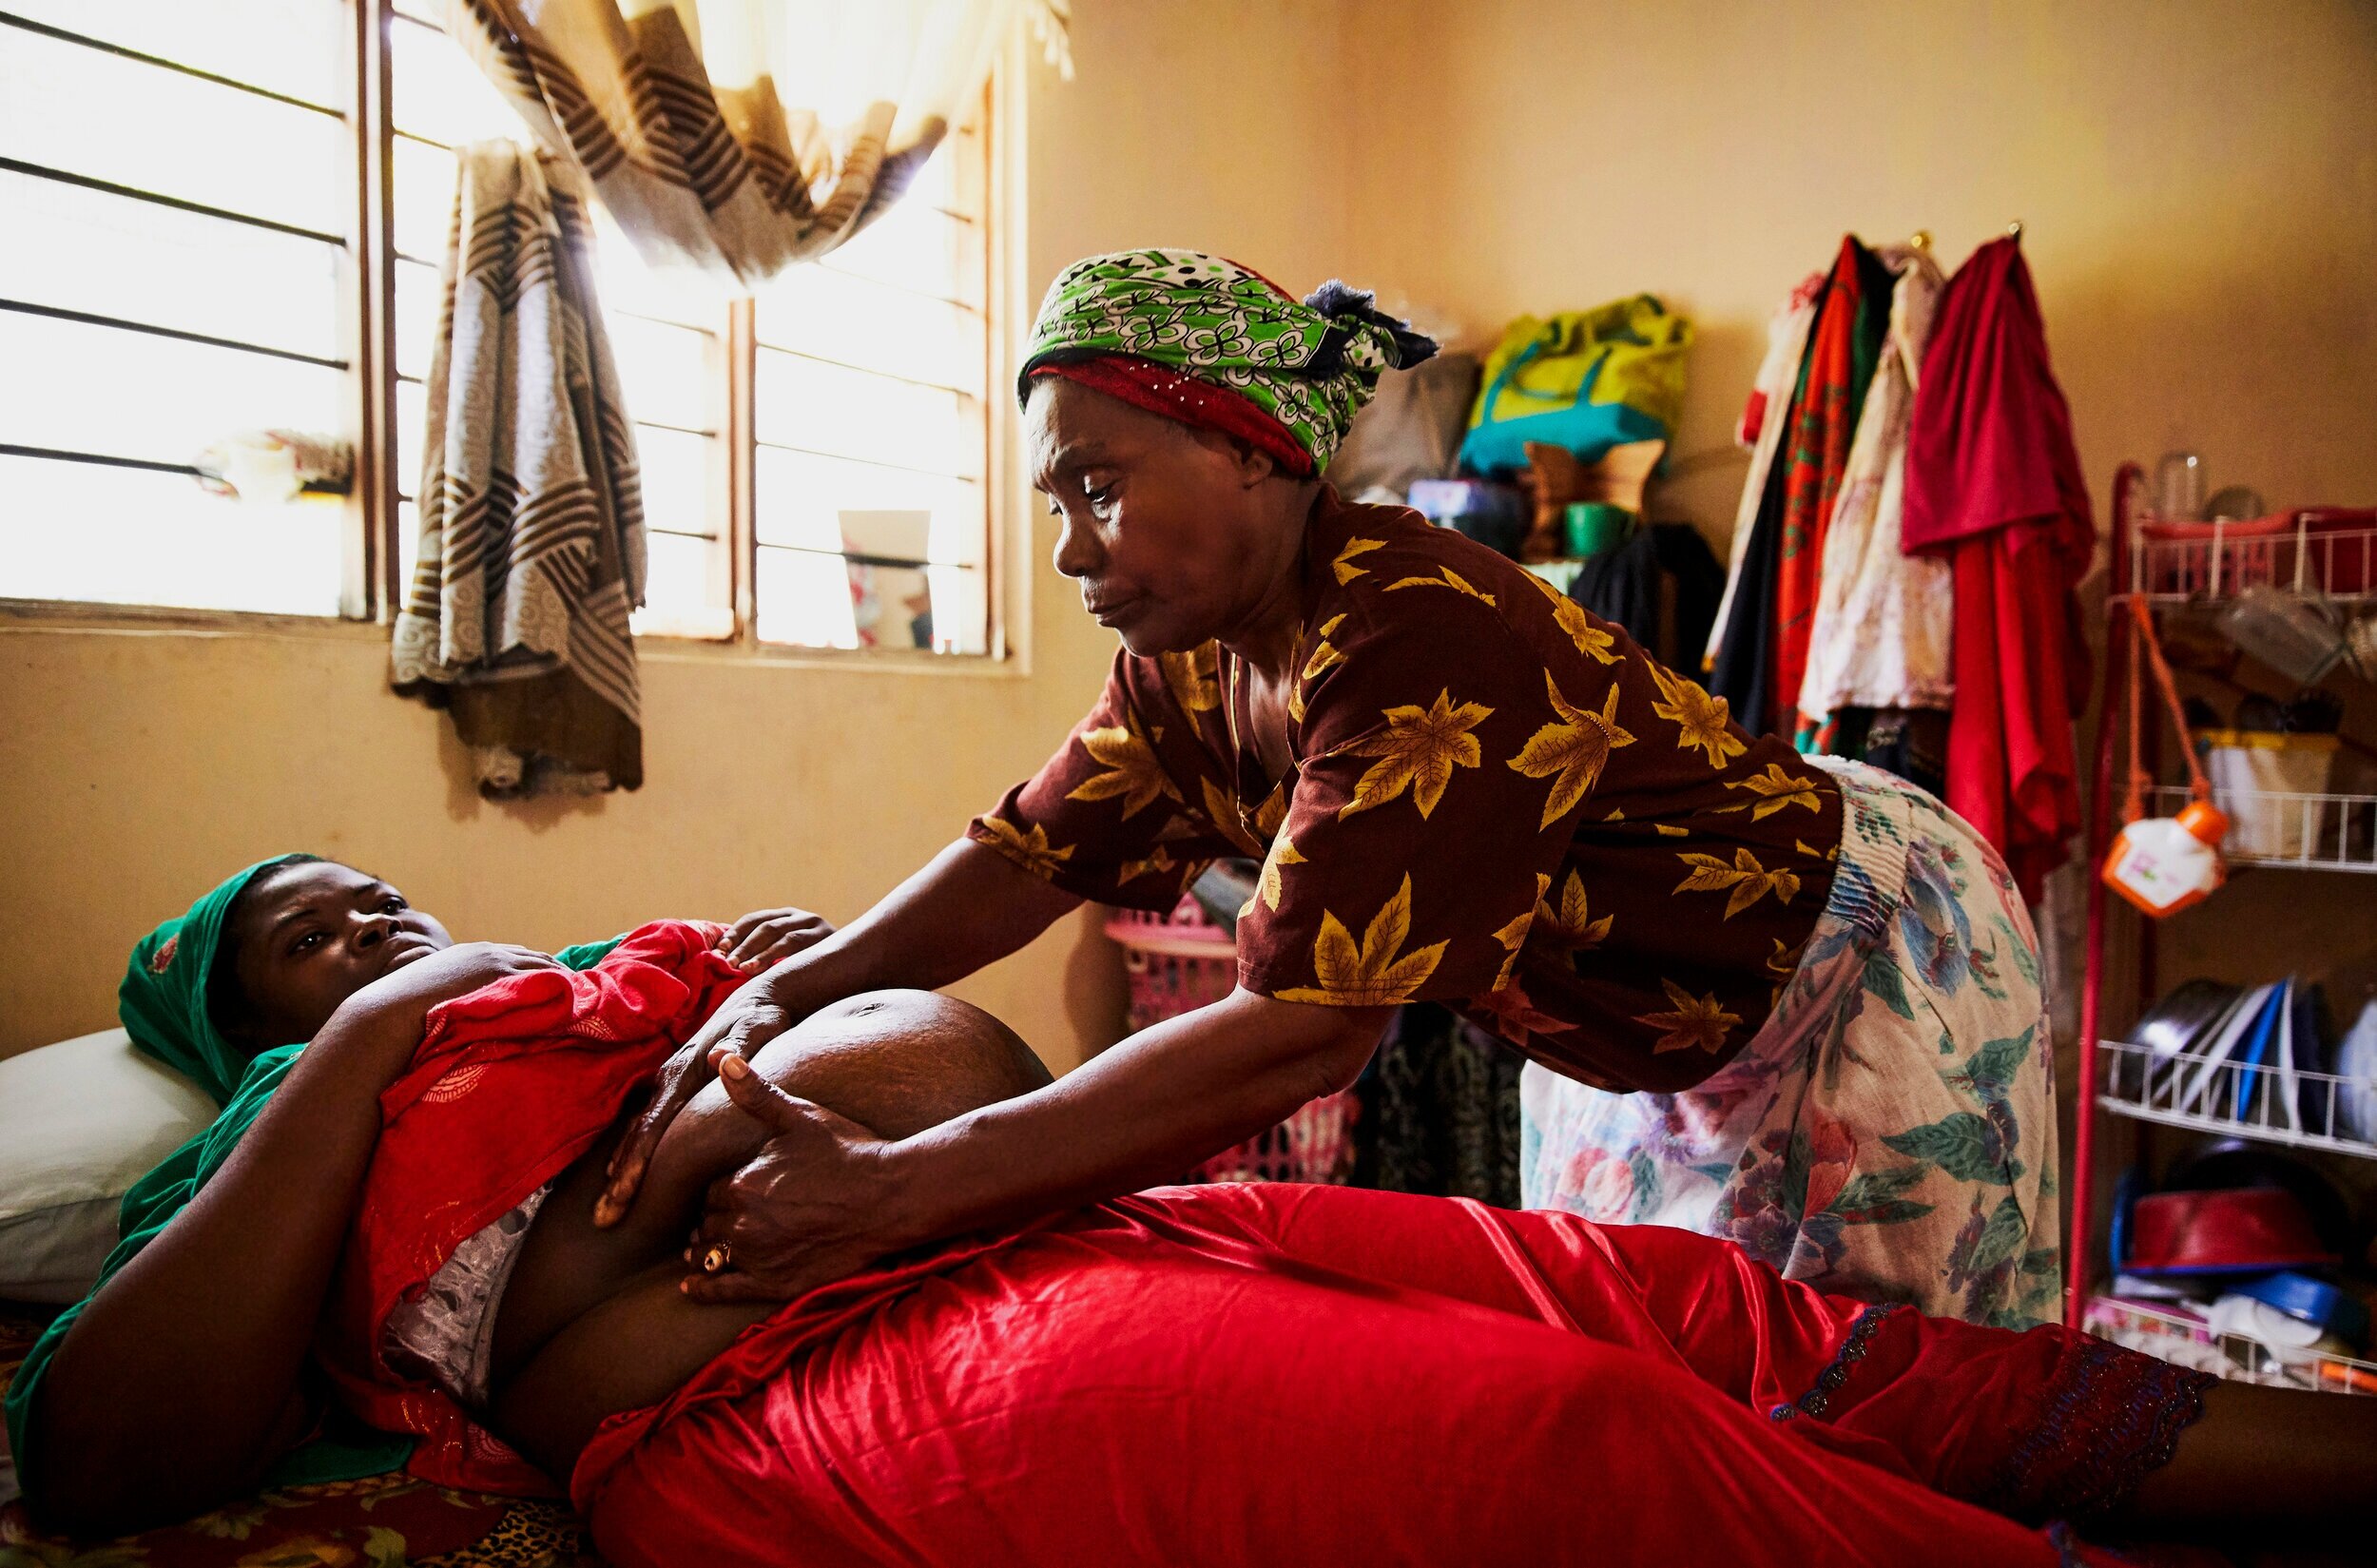  Traditional healer, Mwanahija Mzee, massages pregnant patient, Maryam Juma, 29. This is Maryam’s 5th pregnancy though 3 miscarried and 1 was stillborn, so she has no living children. Both she and the healer believe the reason she hasn’t been able to